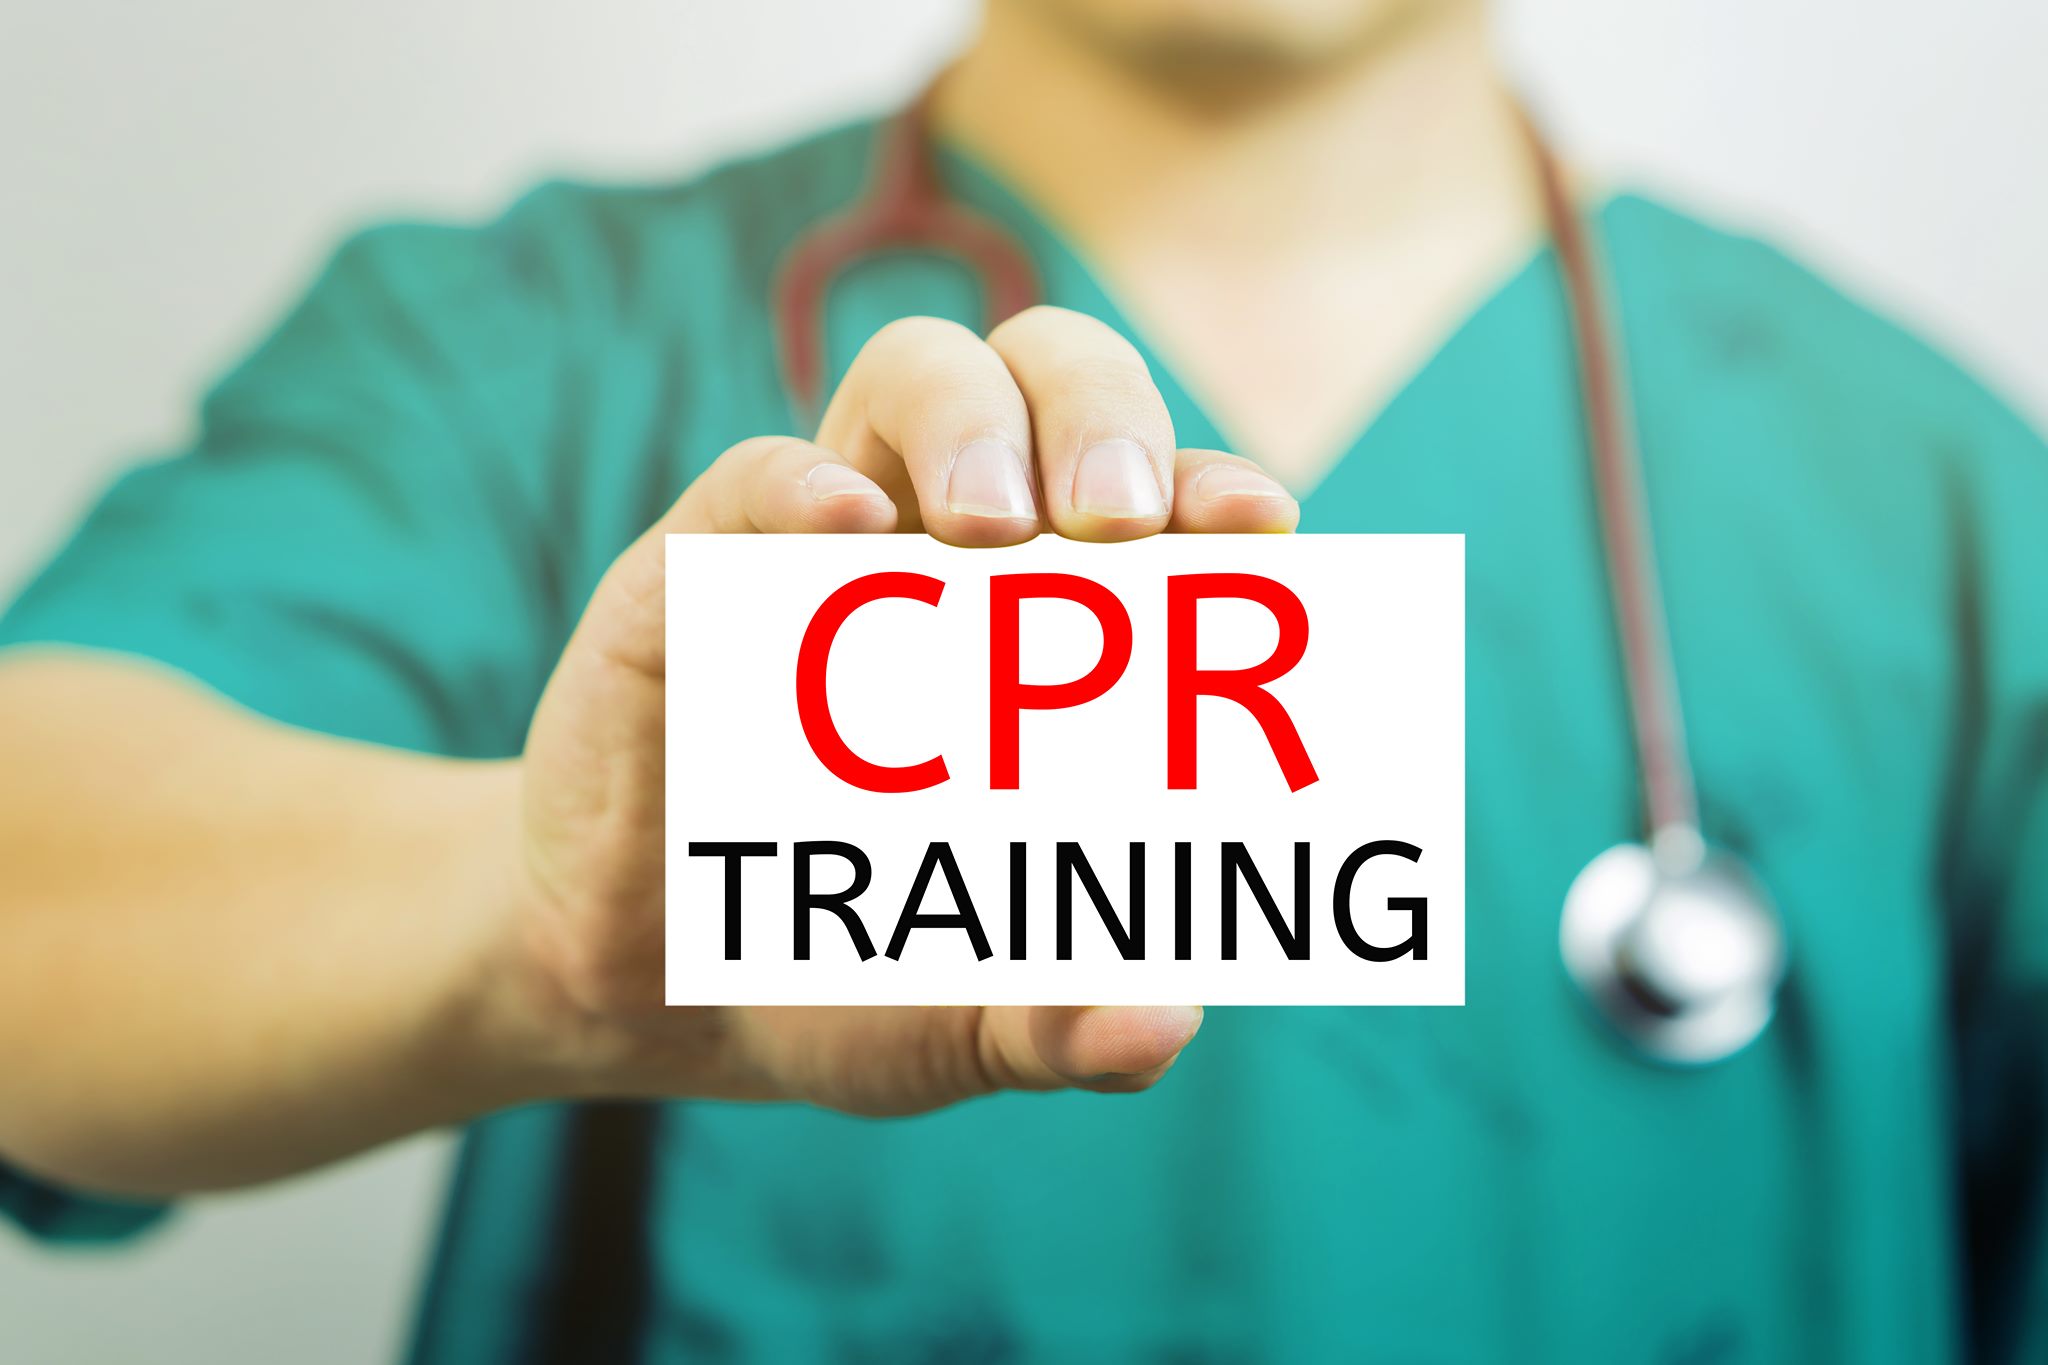 BLS CPR Classes Near Me: Learn Life Saving Skills with Pulse CPR and